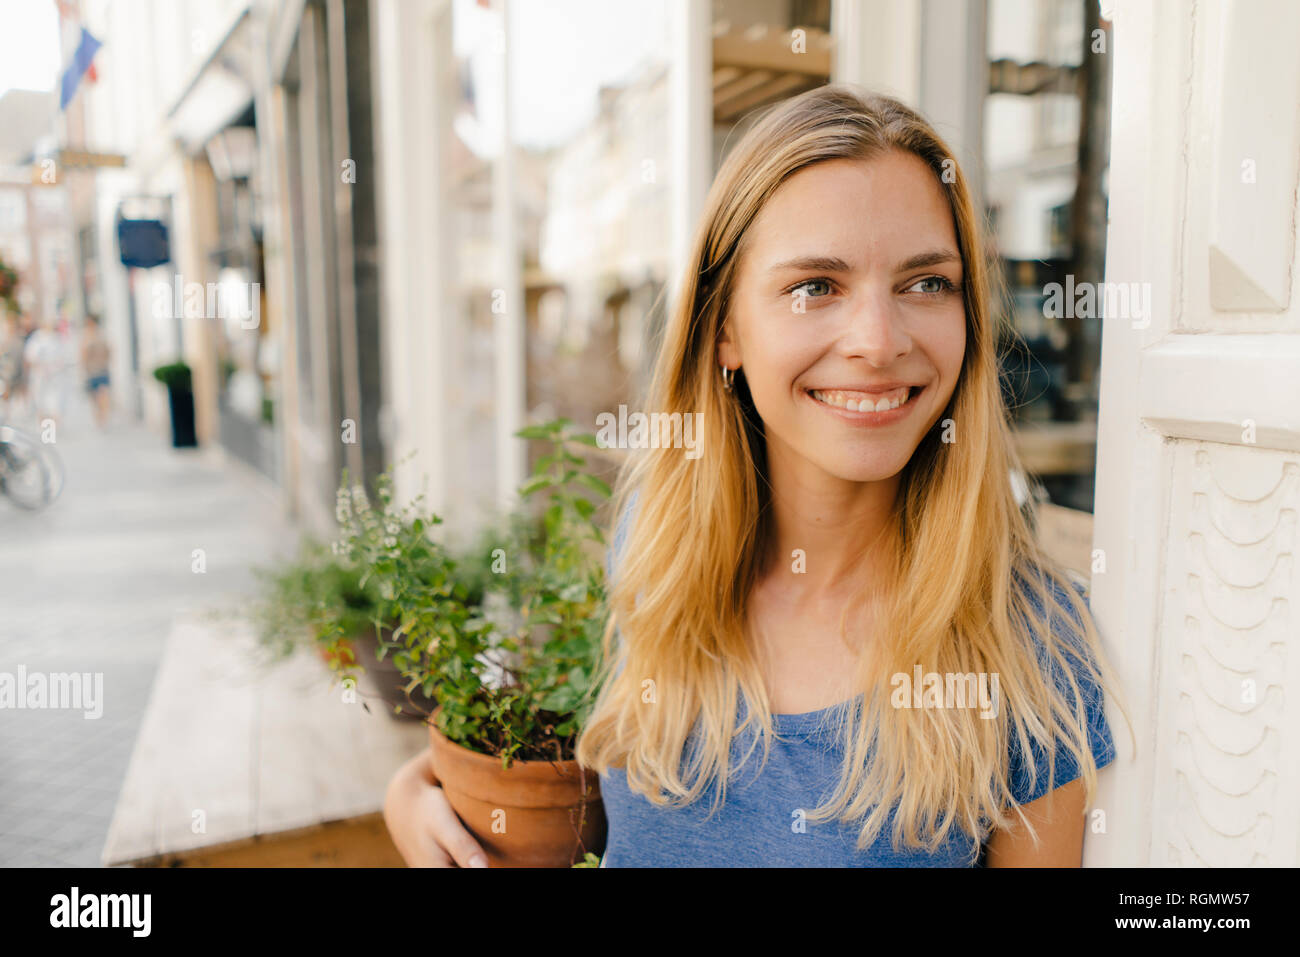 Netherlands, Maastricht, smiling blond young woman holding flowerpot in the city Stock Photo